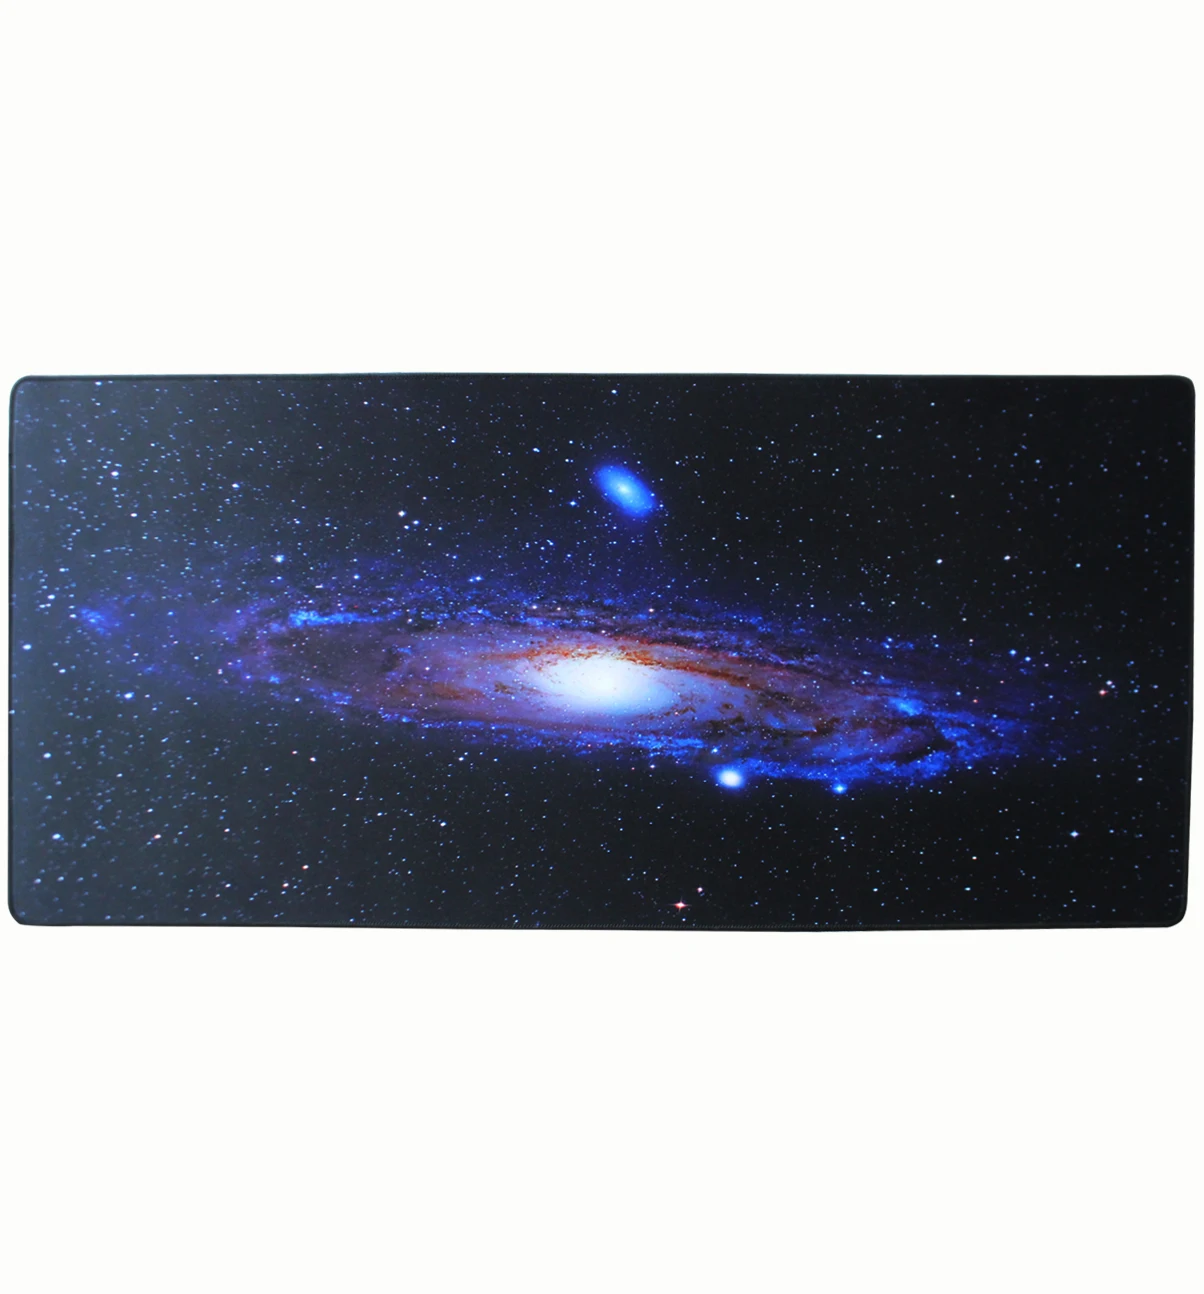 

spot Large size custom shape microfiber natural rubber gaming mouse pad custom large mouse pads, All colors is available